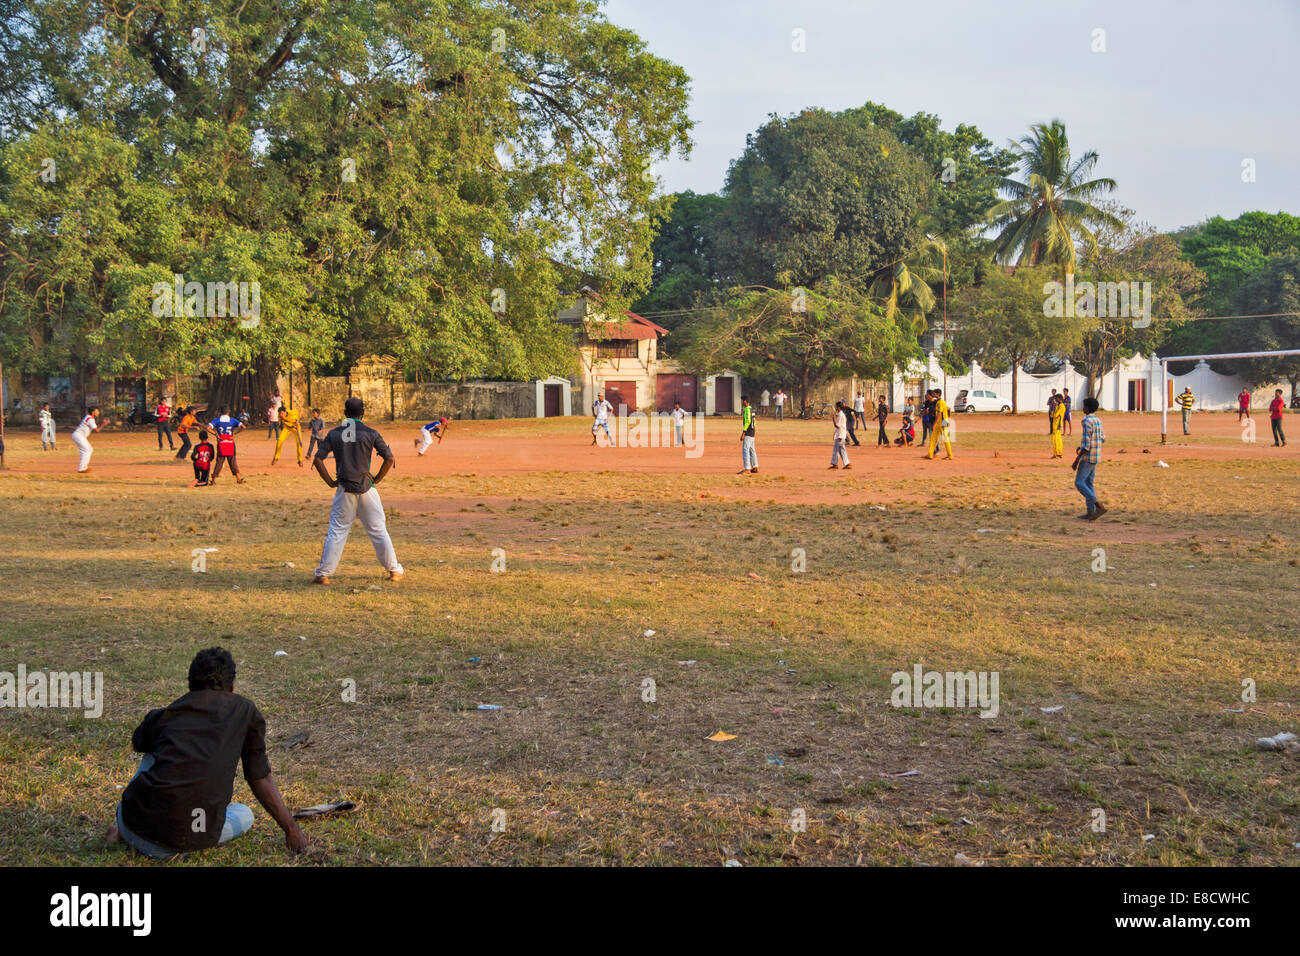 WATCHING A GAME OF CRICKET IN A PARK PORT KOCHI or COCHIN INDIA Stock Photo